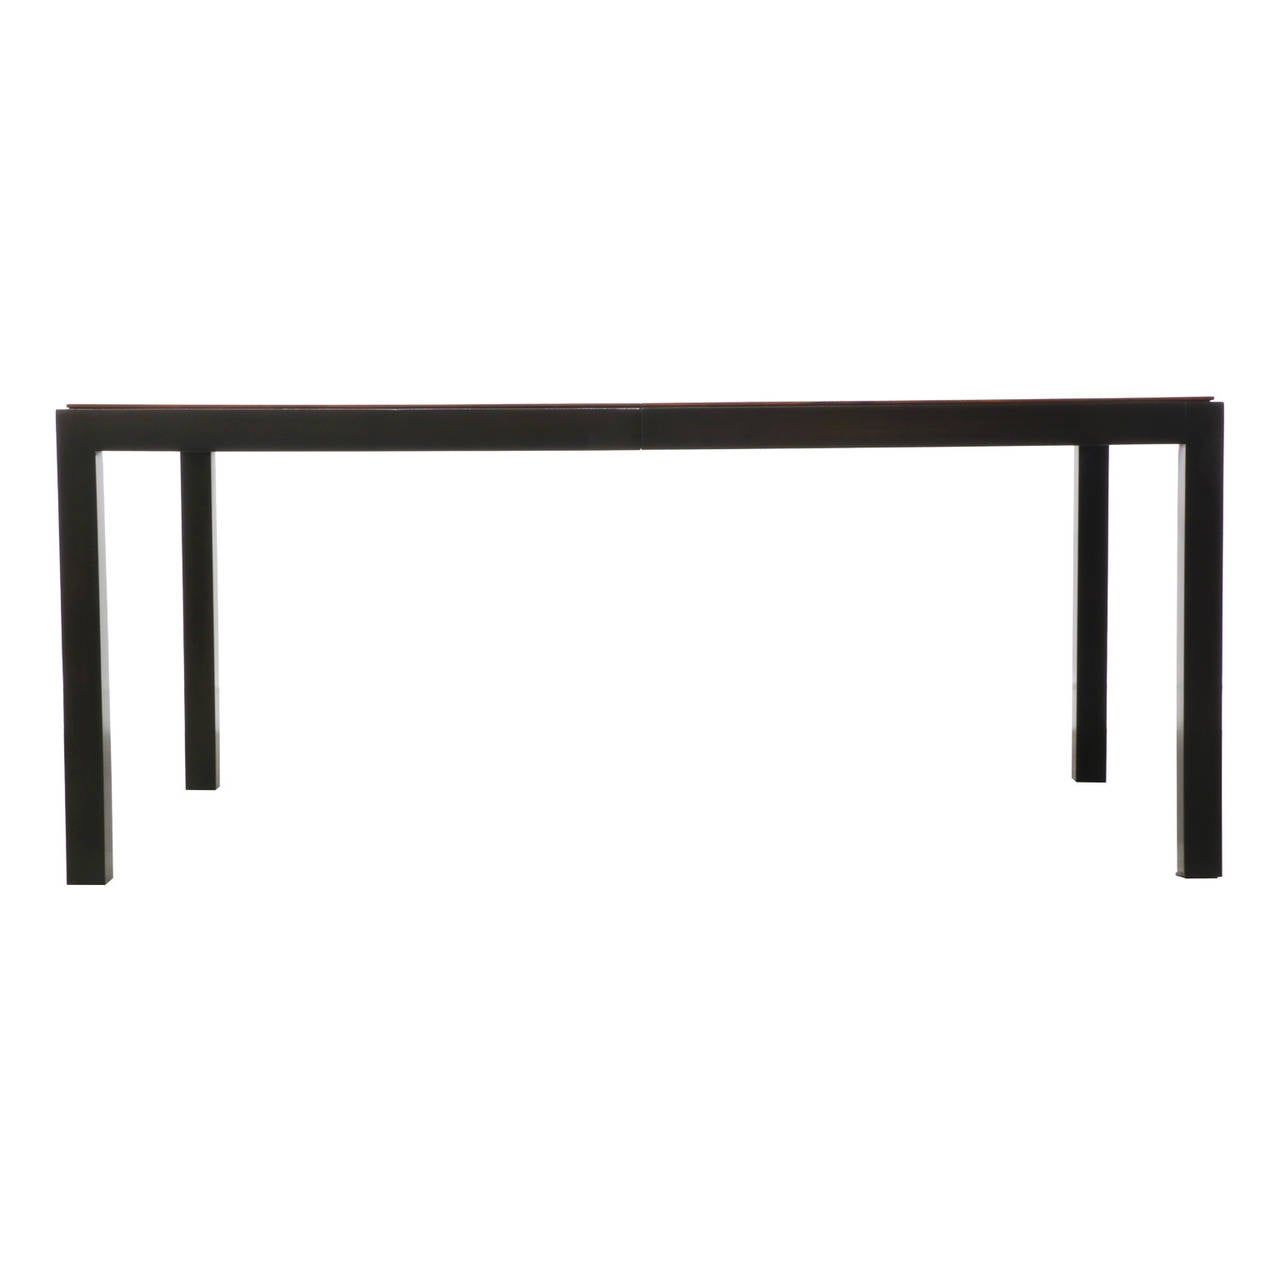 Designer: Unknown
Manufacturer: Unknown
Period/Style: Mid Century Modern
Country: United States
Date: 1960’s

Dimensions: 28.5″H x 68″L x 40″W
Expanding extentions 20″ Each
Total Extention 108″
Materials: Rosewood, Black Satin